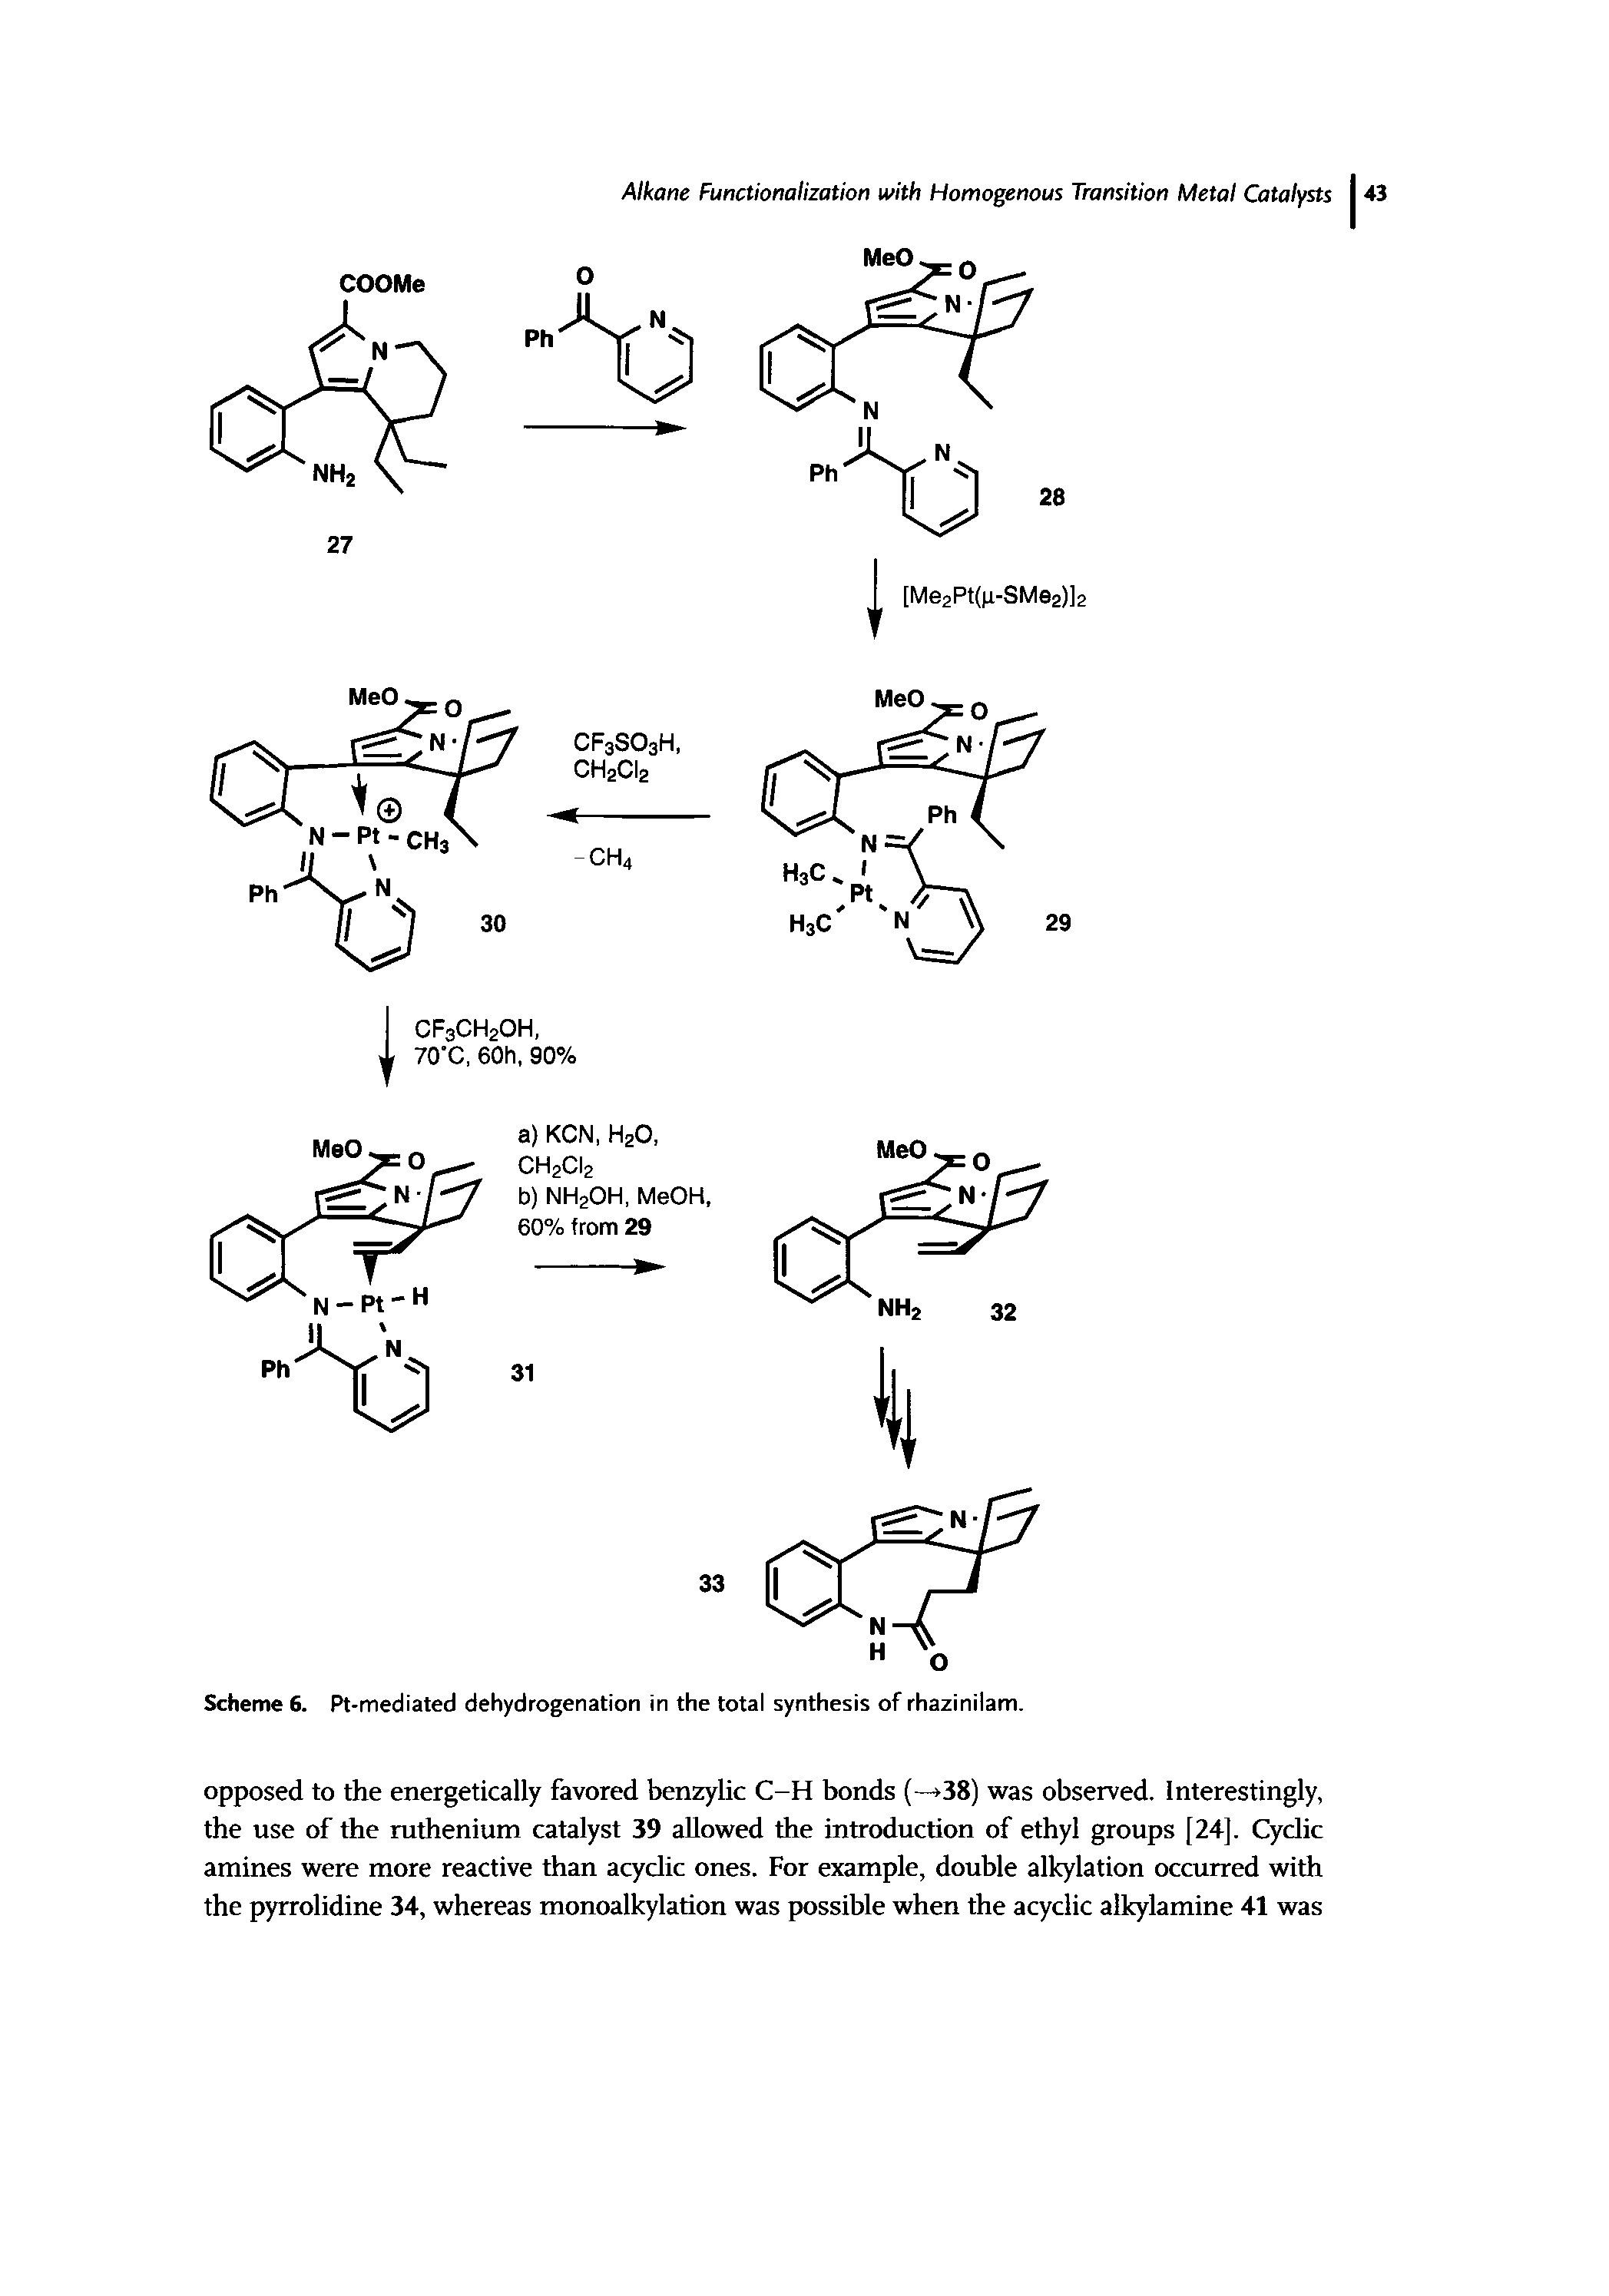 Scheme 6. Pt-mediated dehydrogenation in the total synthesis of rhazinilam.